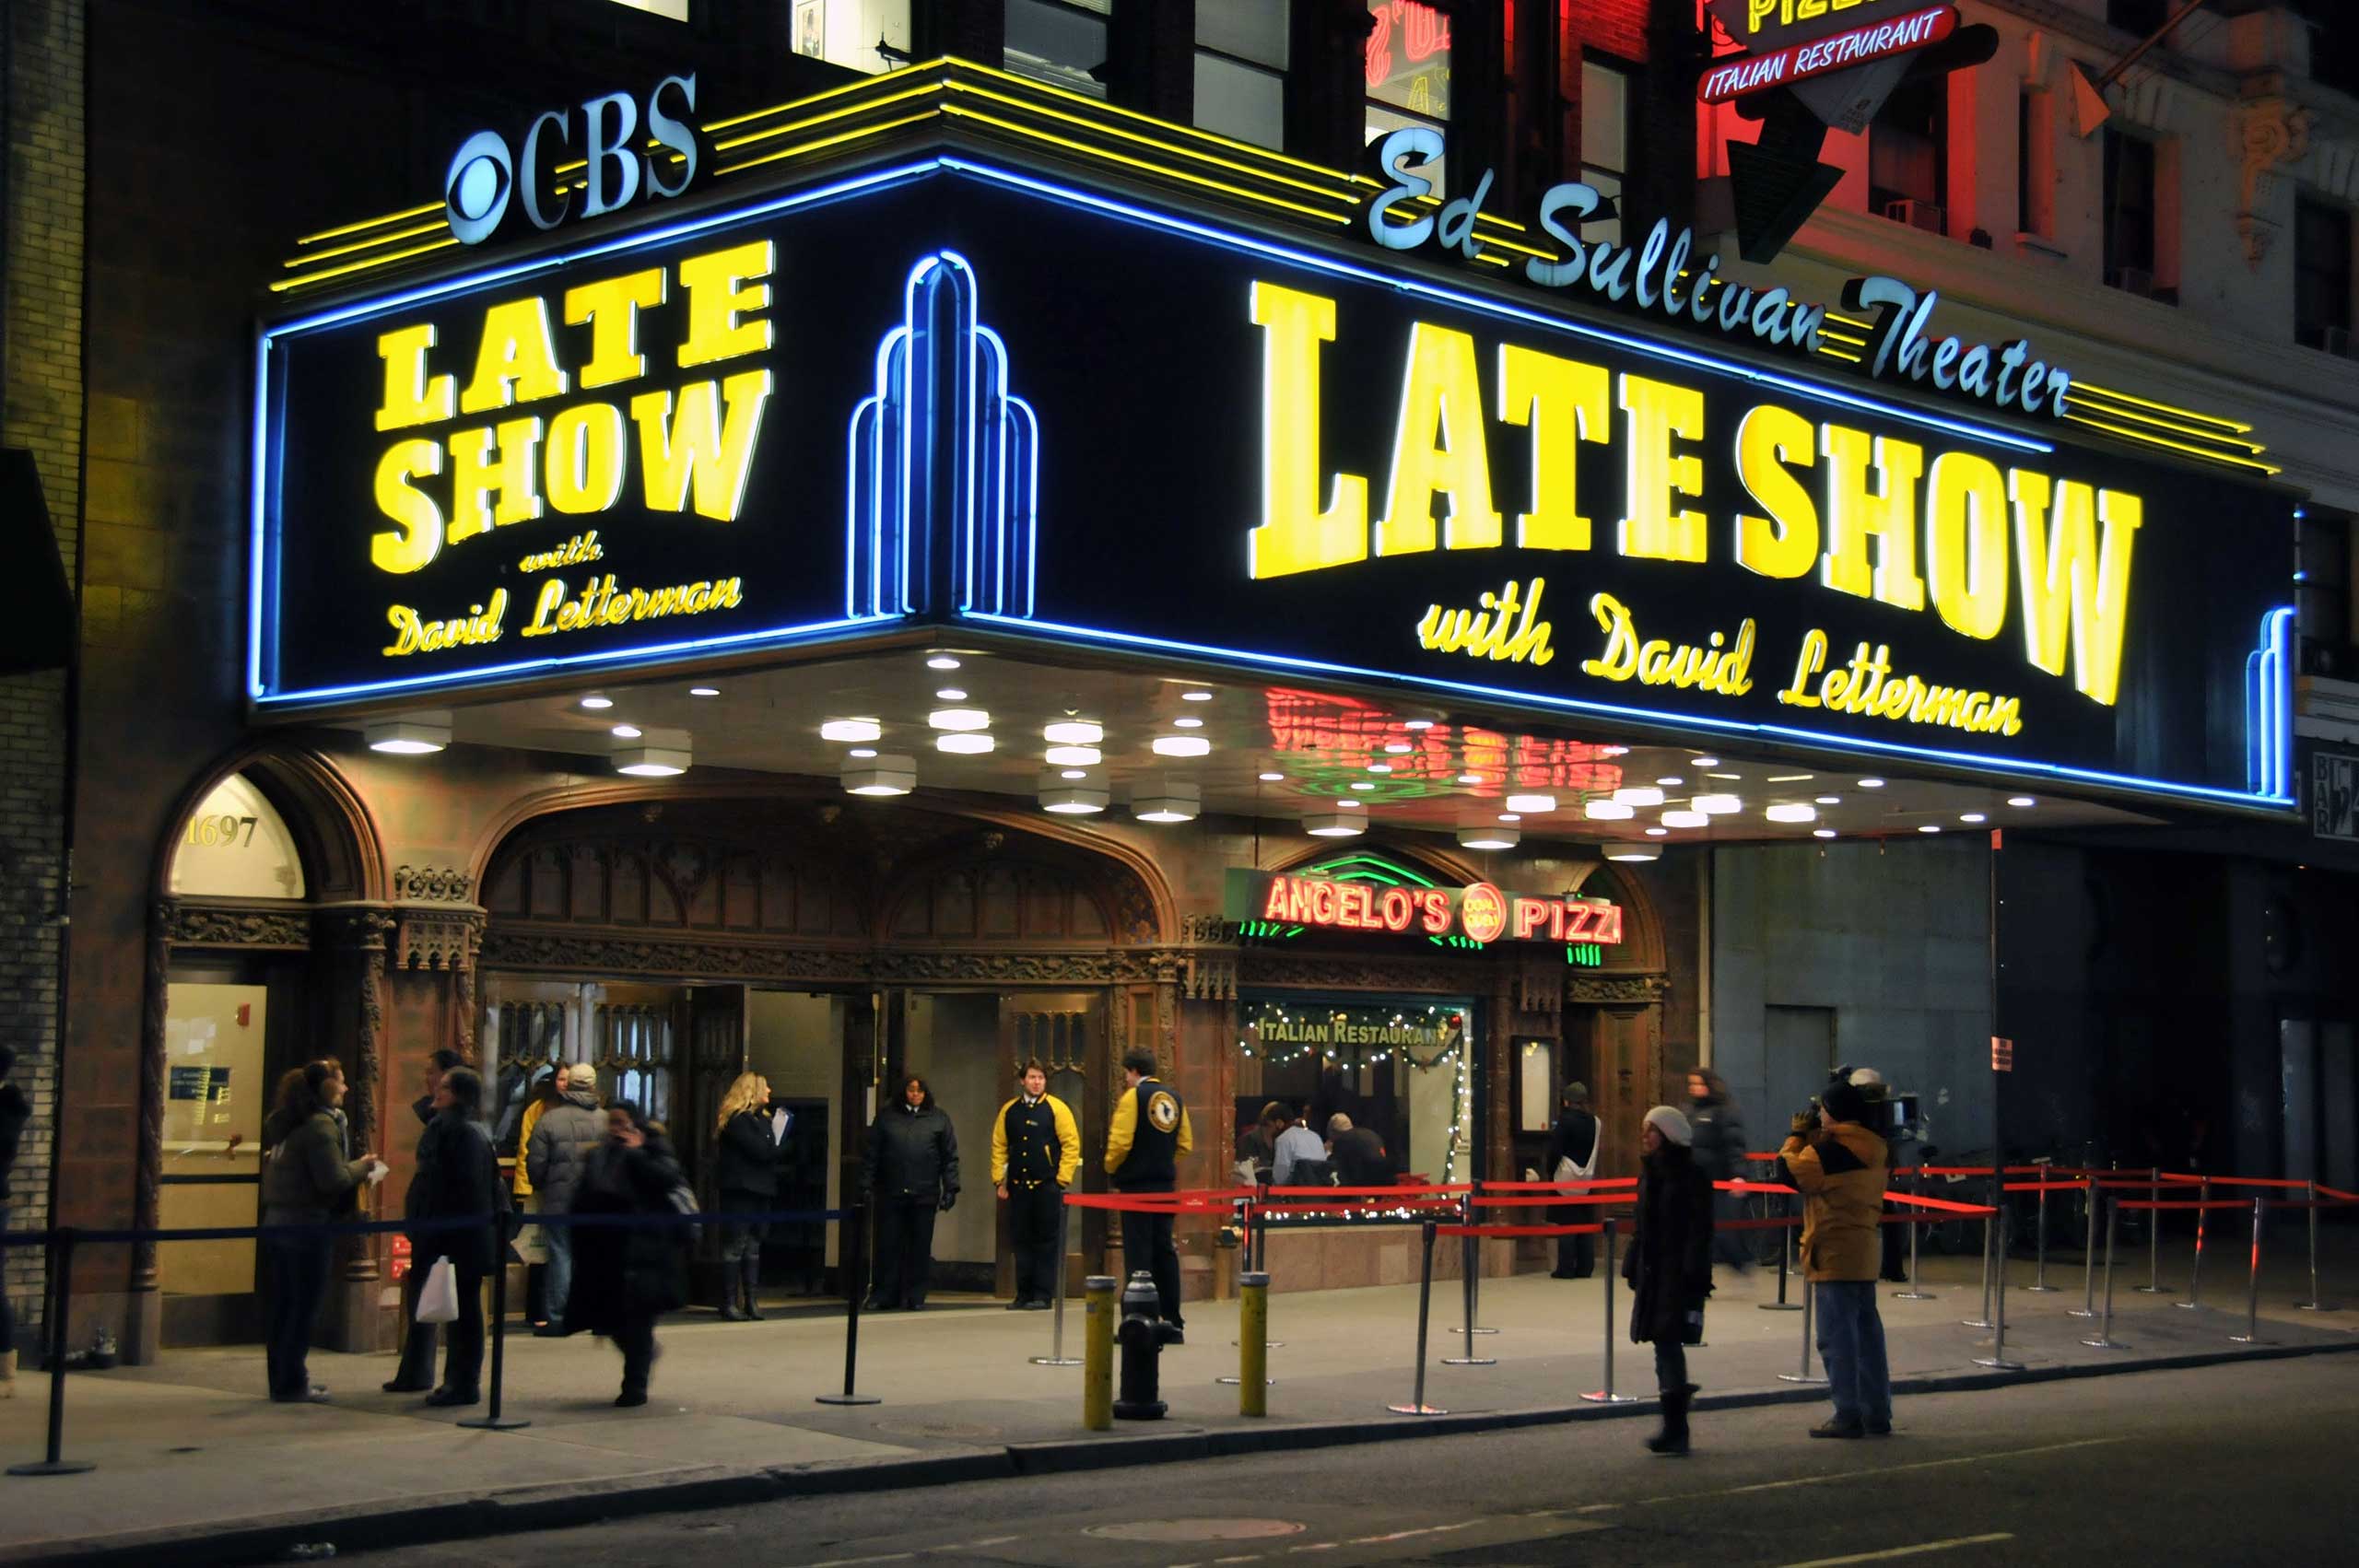 NEW YORK - JANUARY 02:  A general view of the exterior of the Ed Sullivan Theater during a taping of the Late Show with David Letterman on Jan. 2, 2007 in New York. (Bryan Bedder—Getty Images)